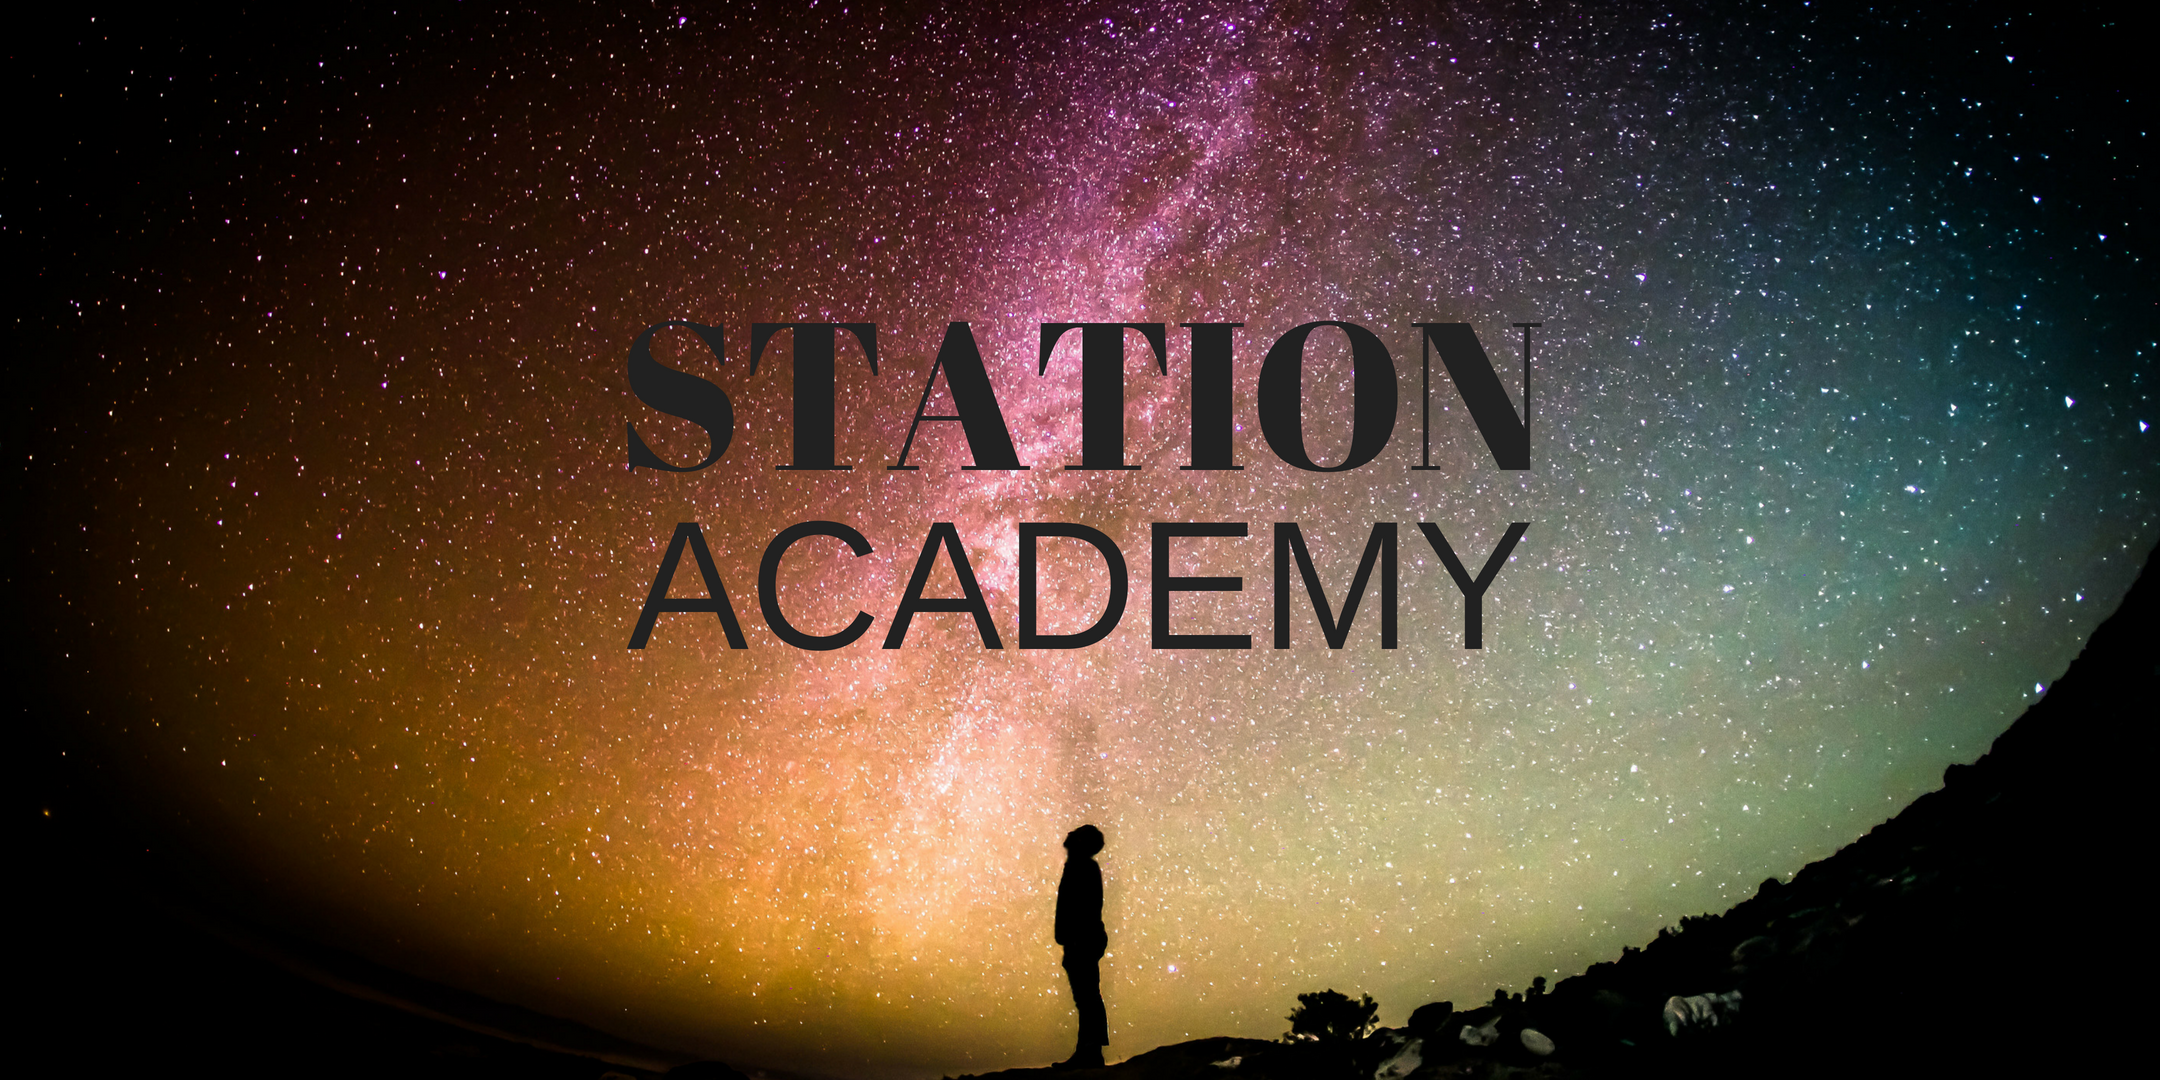 Station Academy: Saturday Student Comedy Showcase with Discord & Rhyme